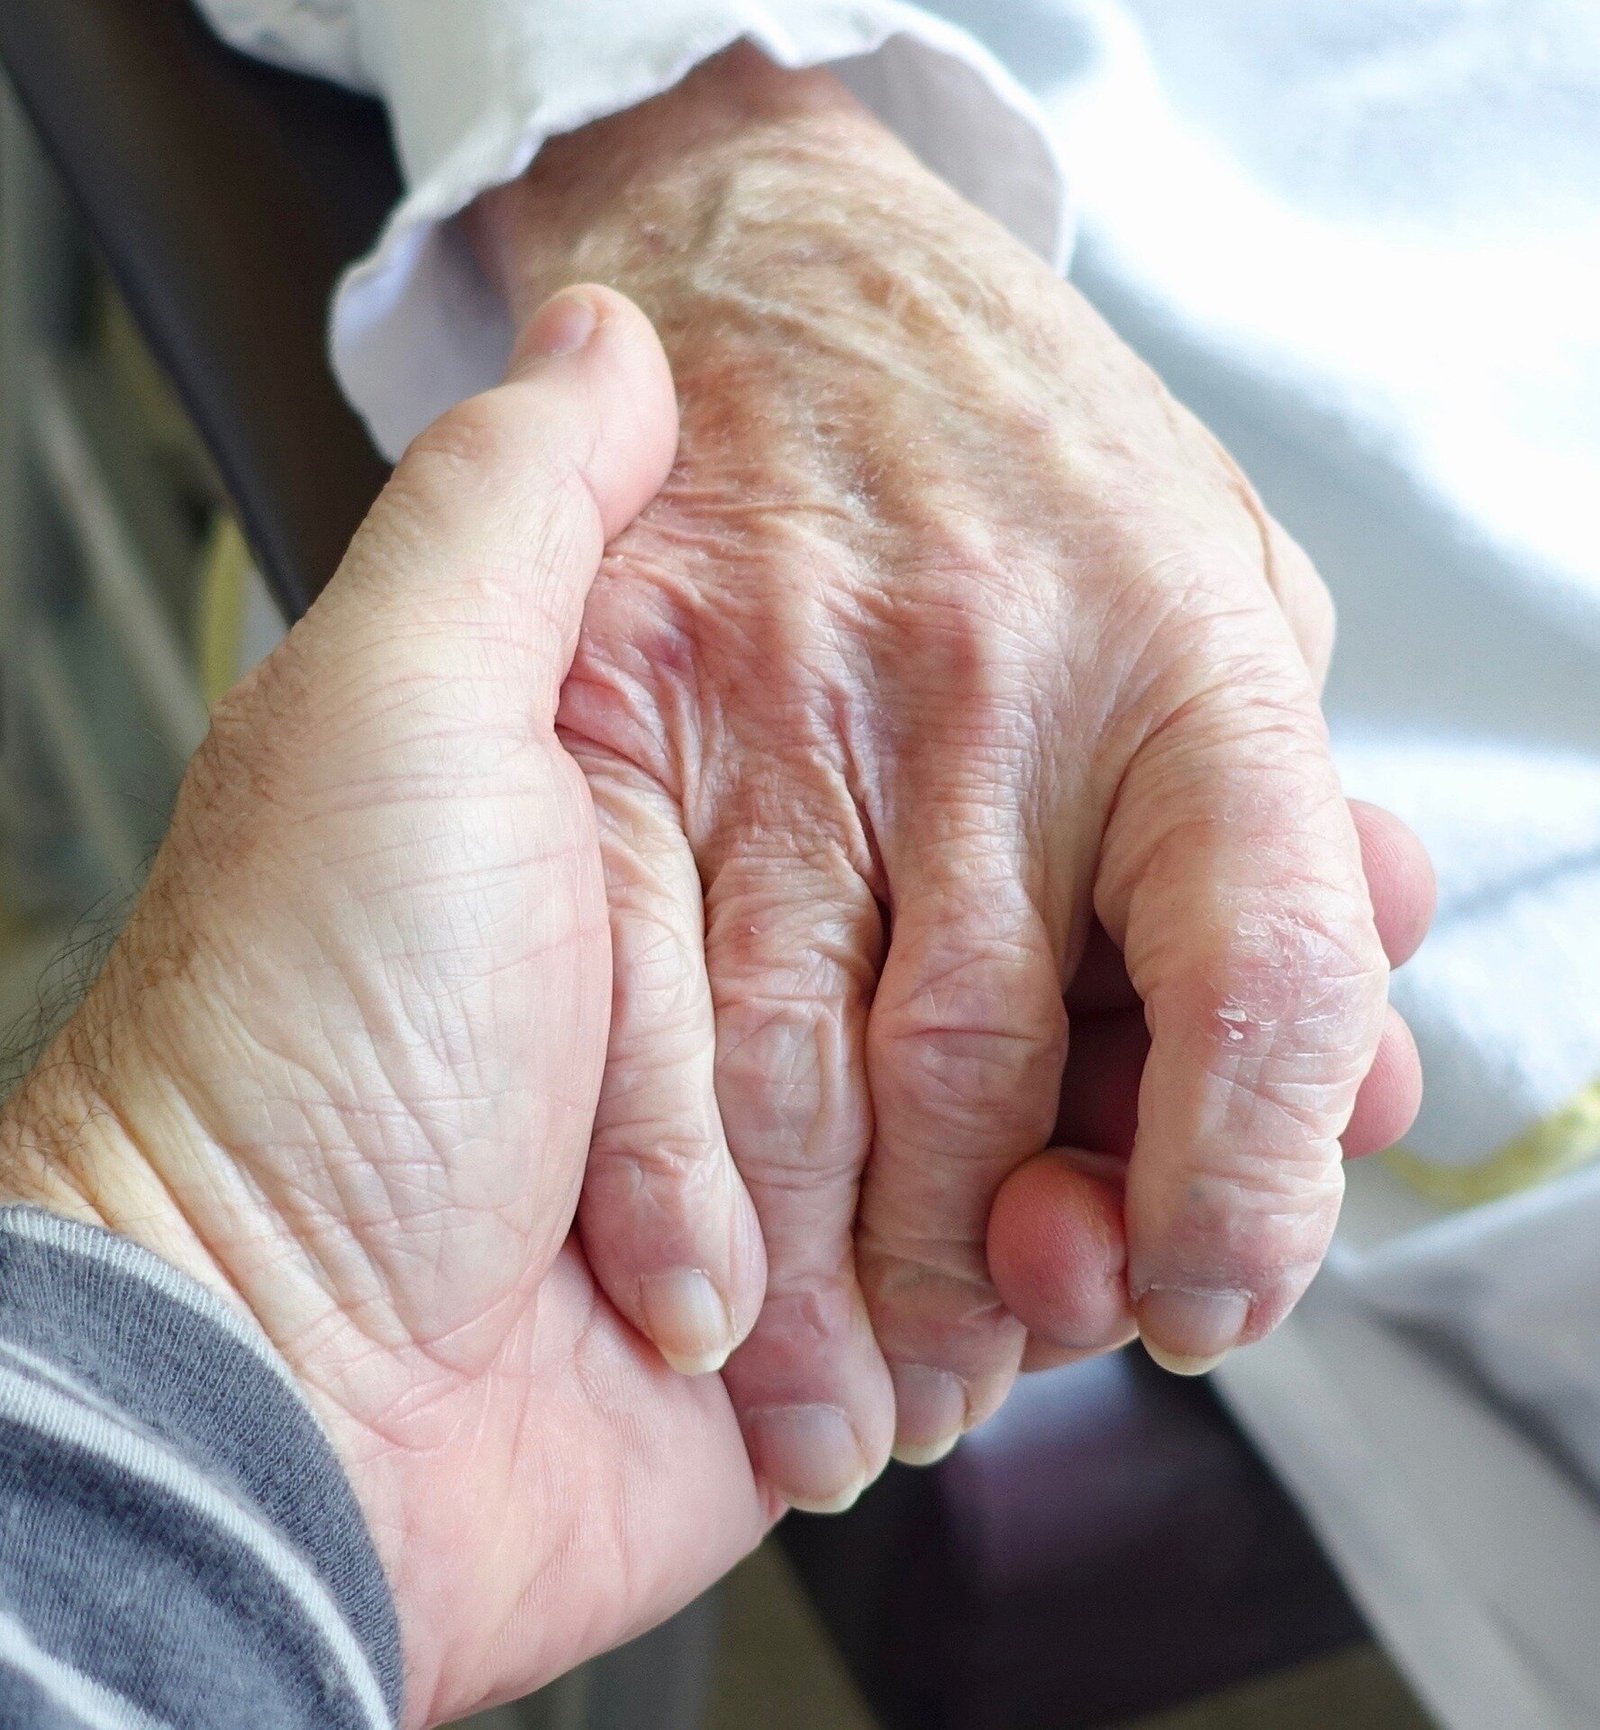 Many older adults receiving home care do not receive palliative care before death, finds study